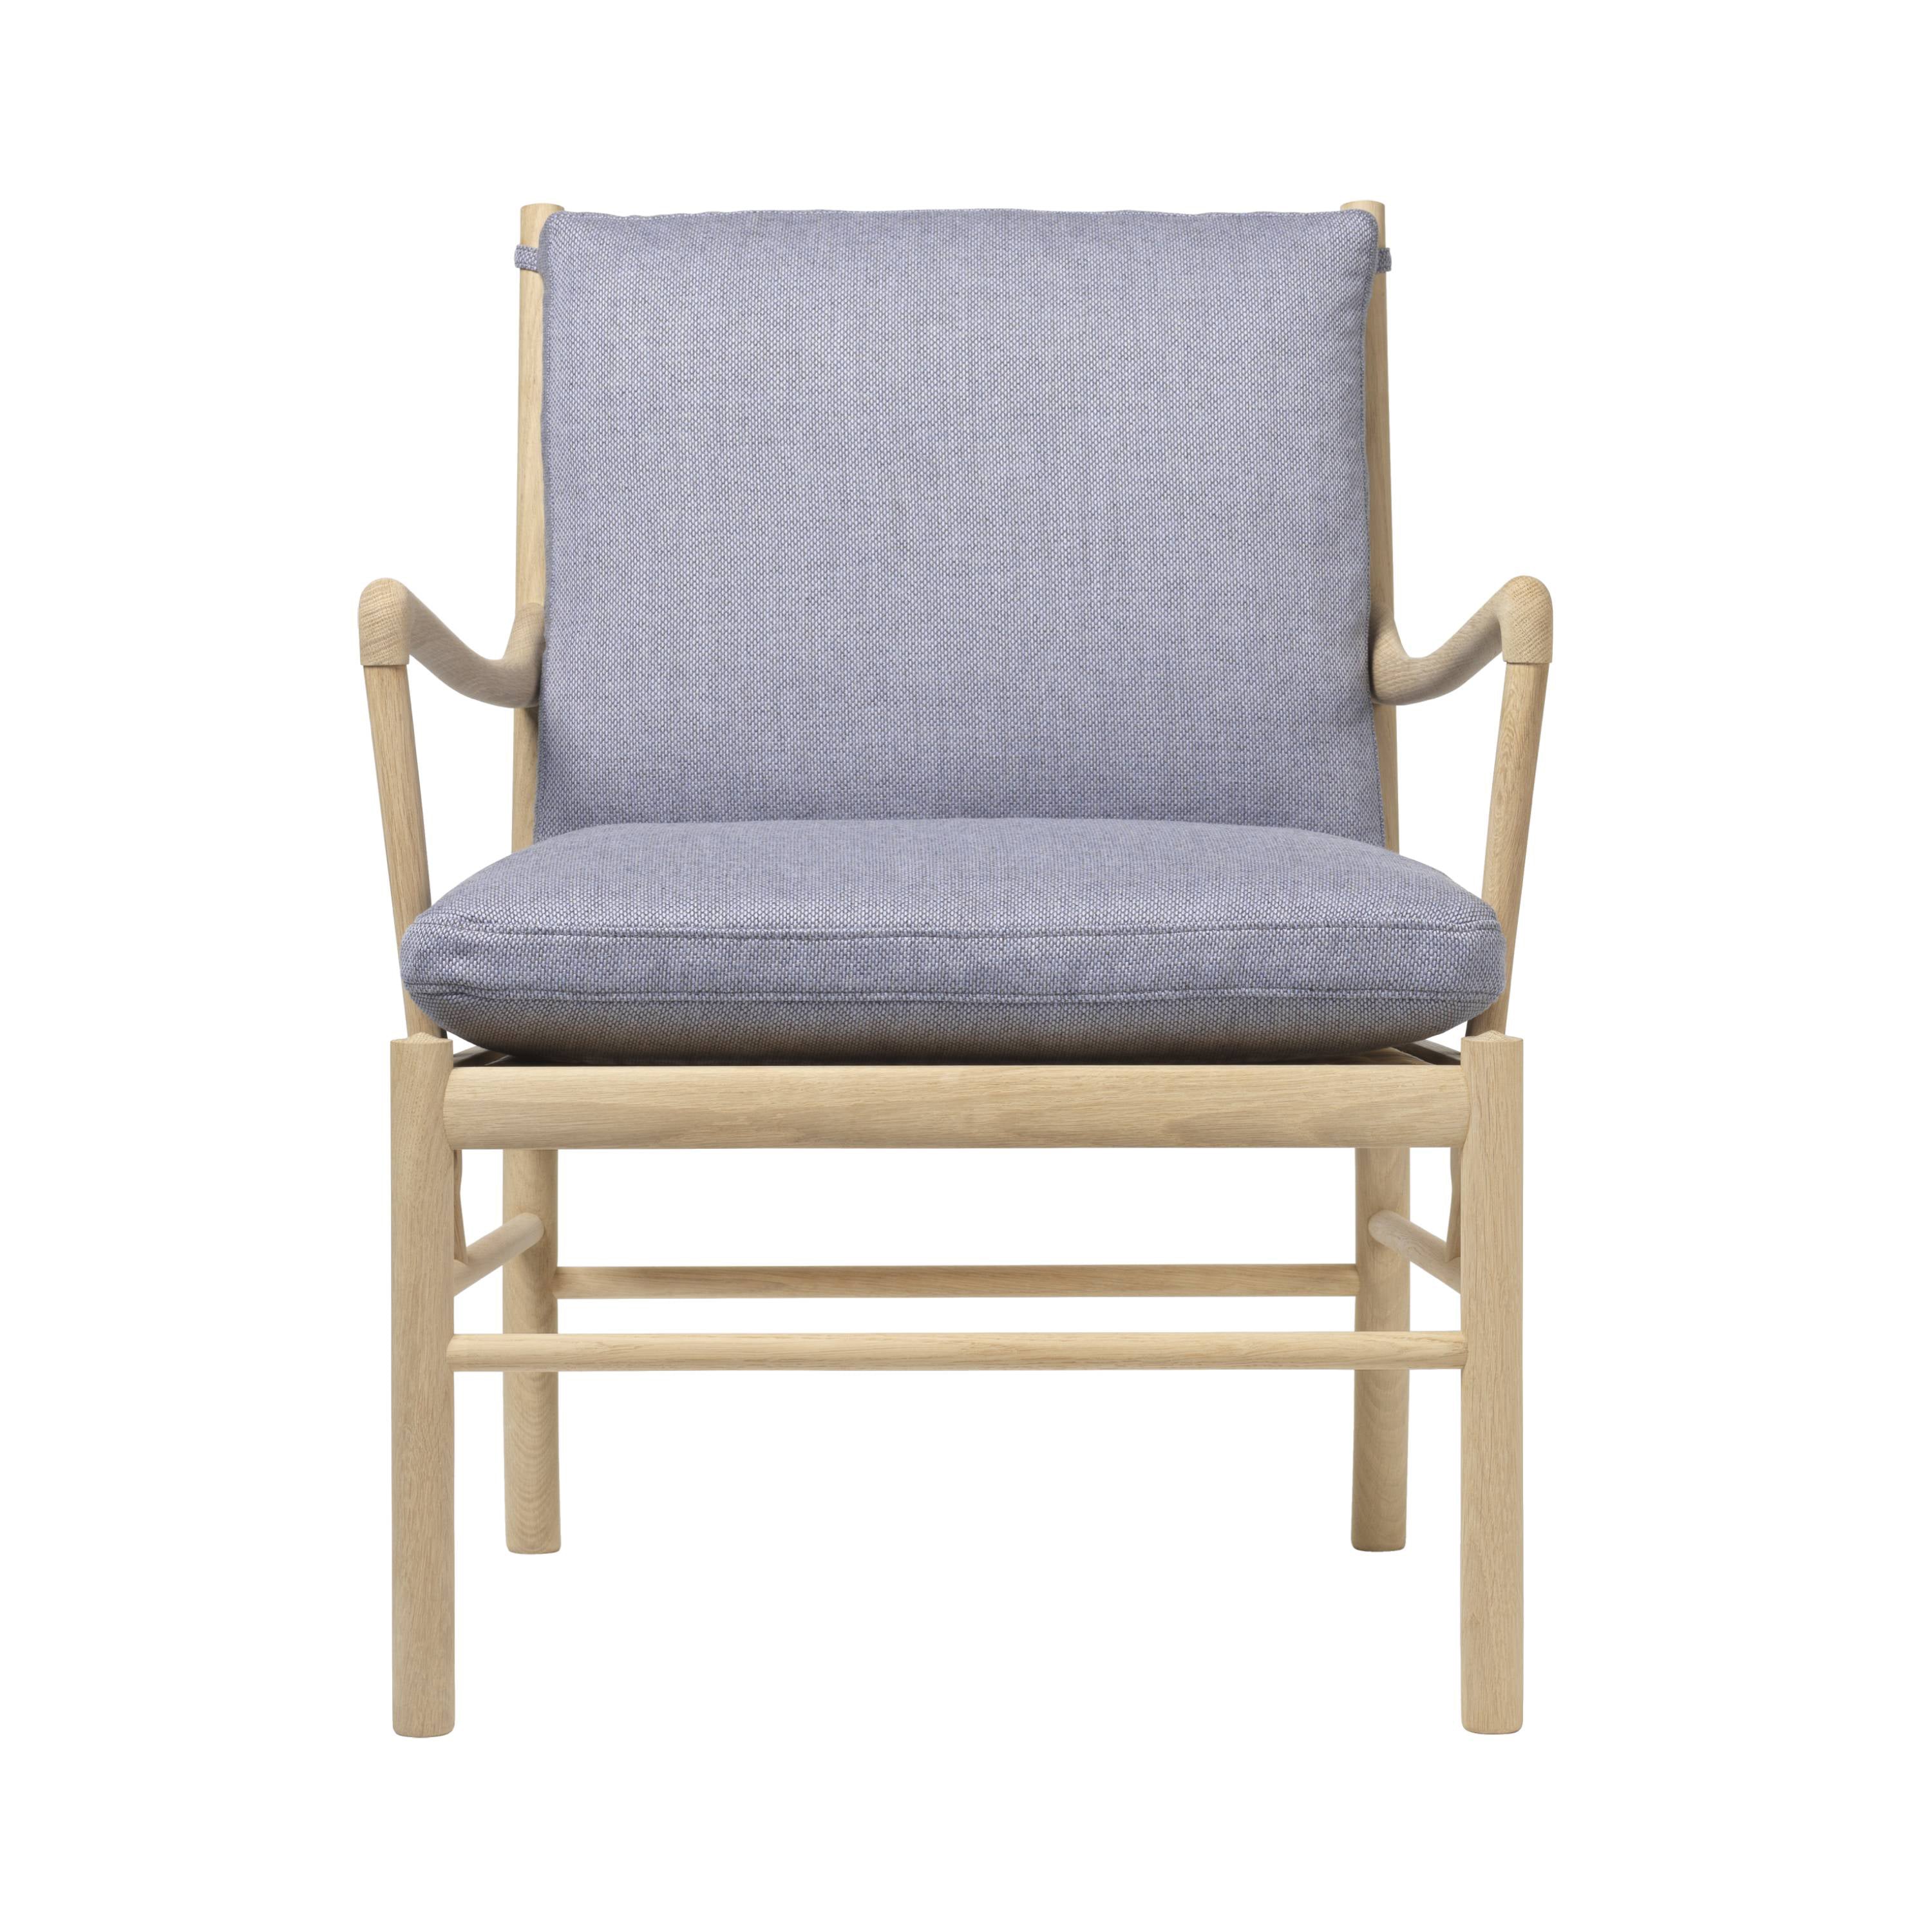 OW149 Colonial Chair: Soaped Oak